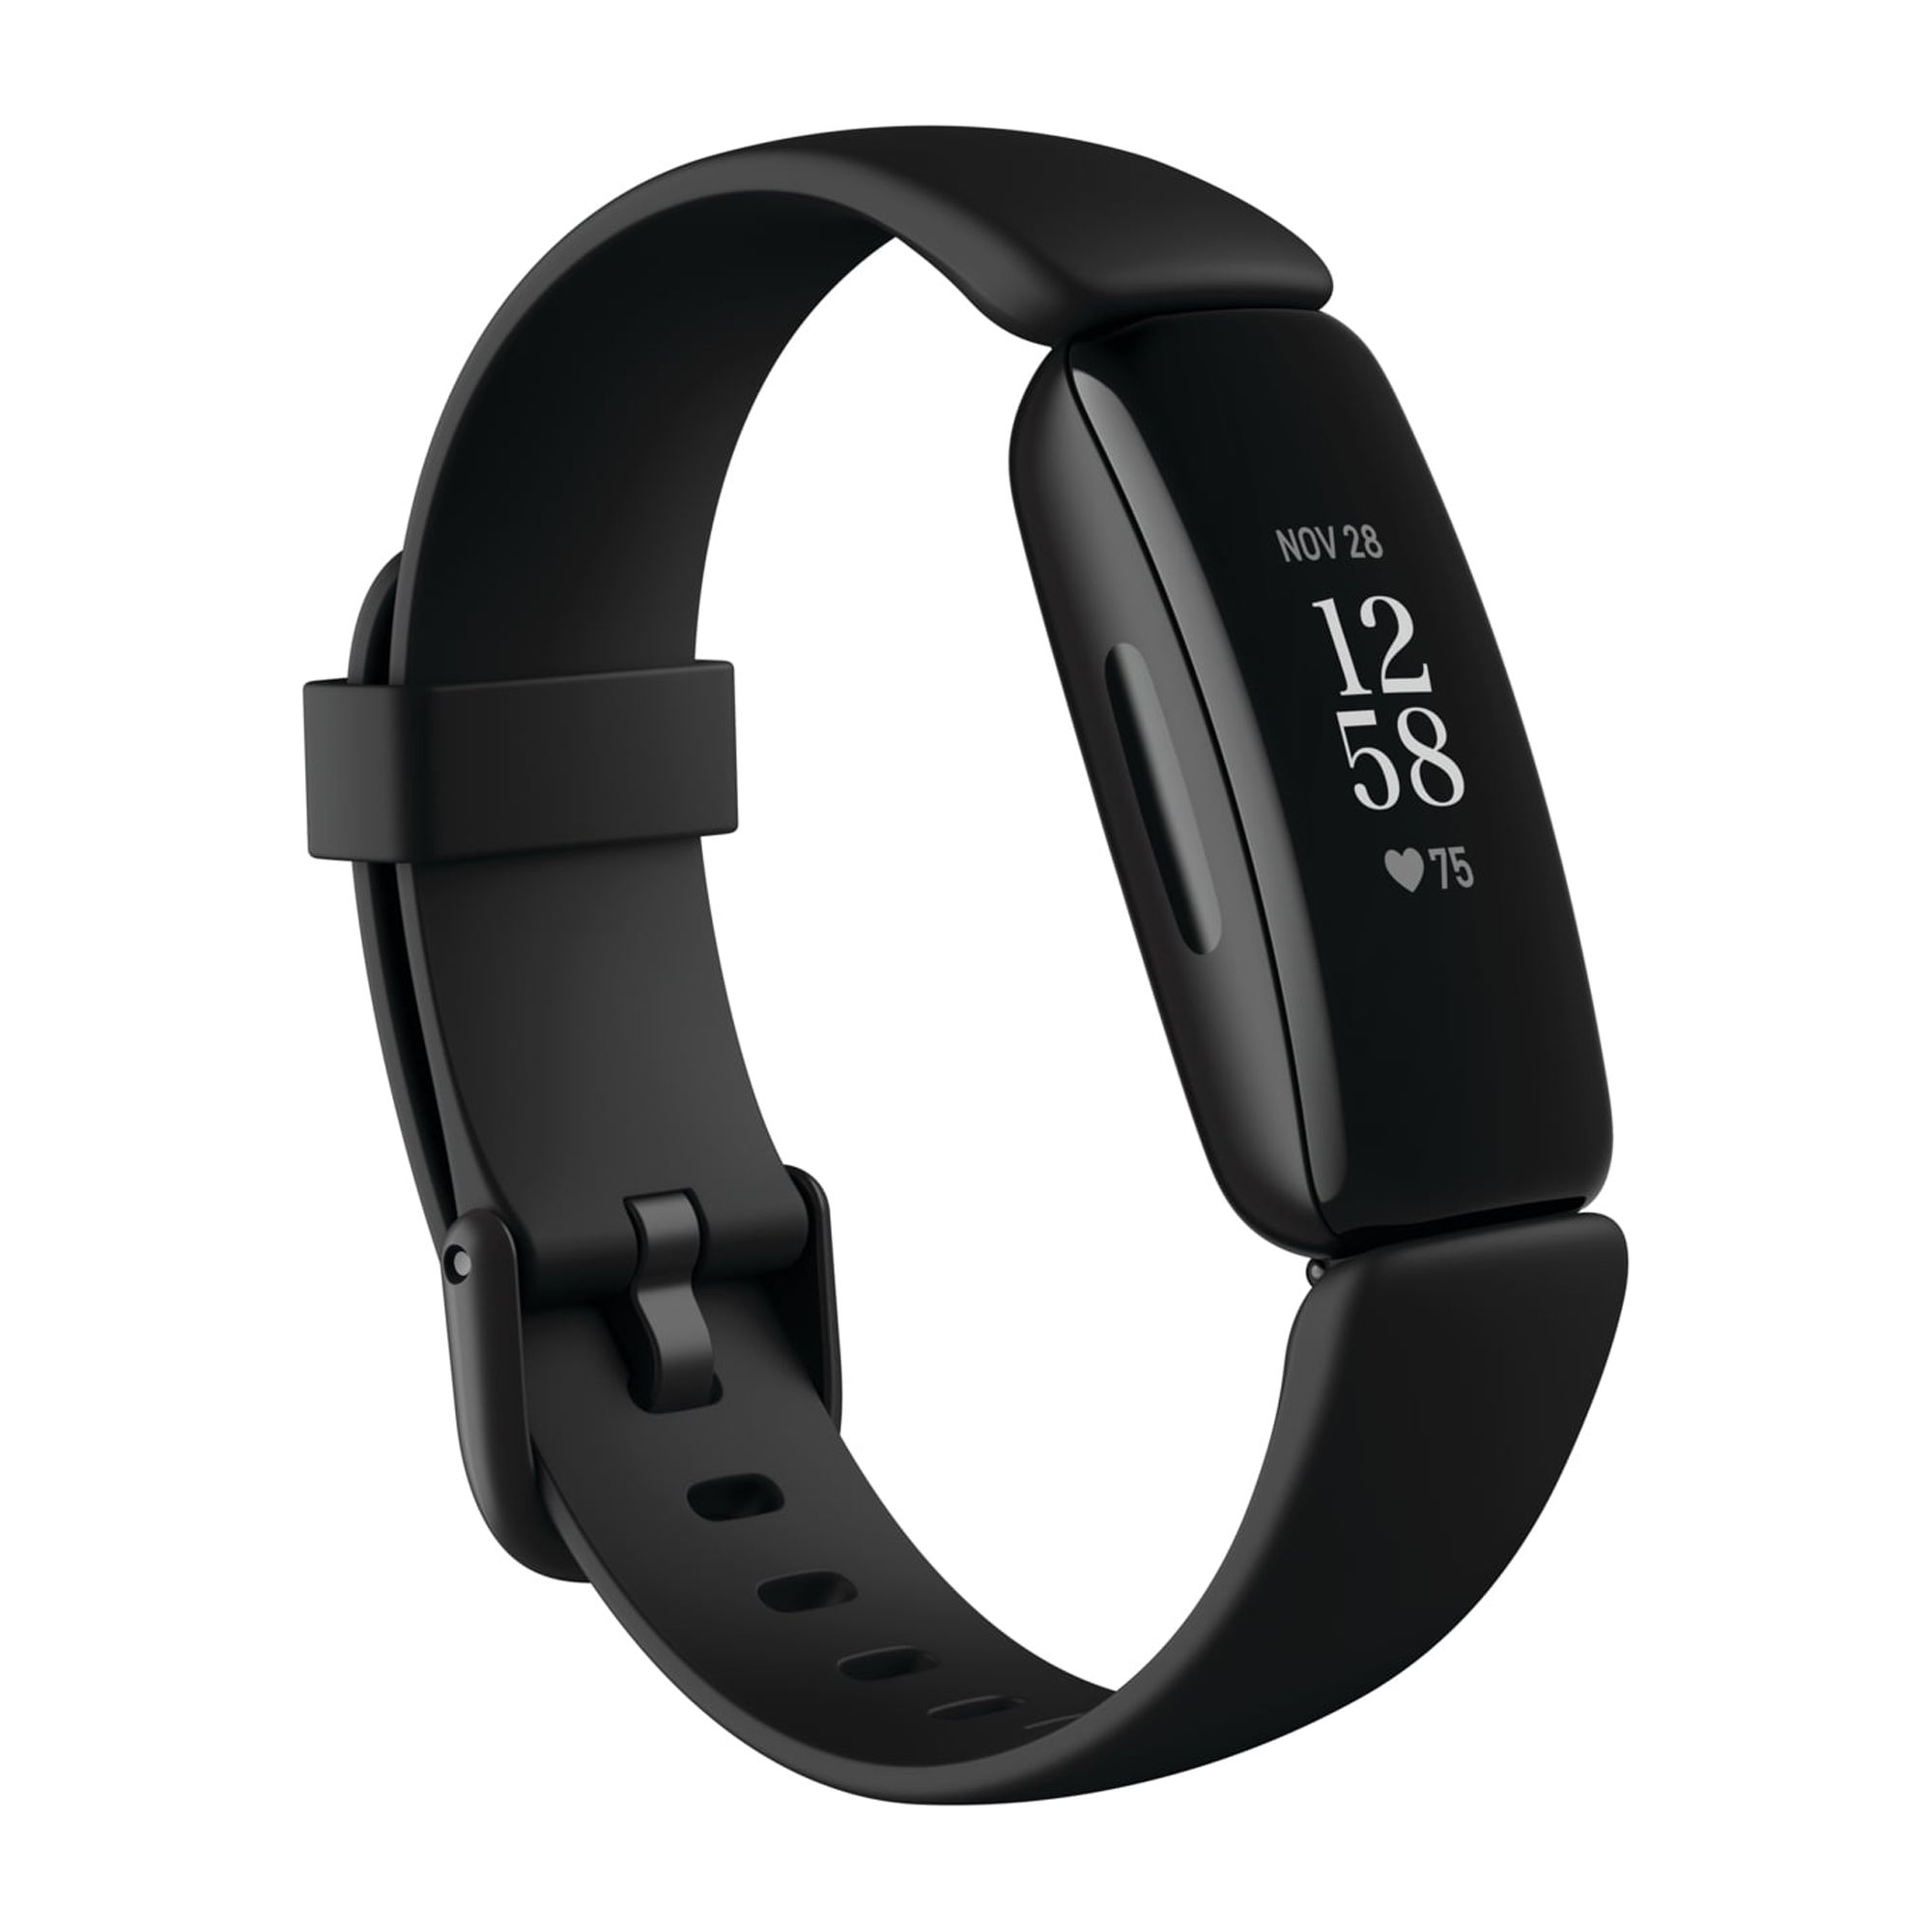 Fitbit Inspire 2 Fitness Tracker - Black - image 1 of 6